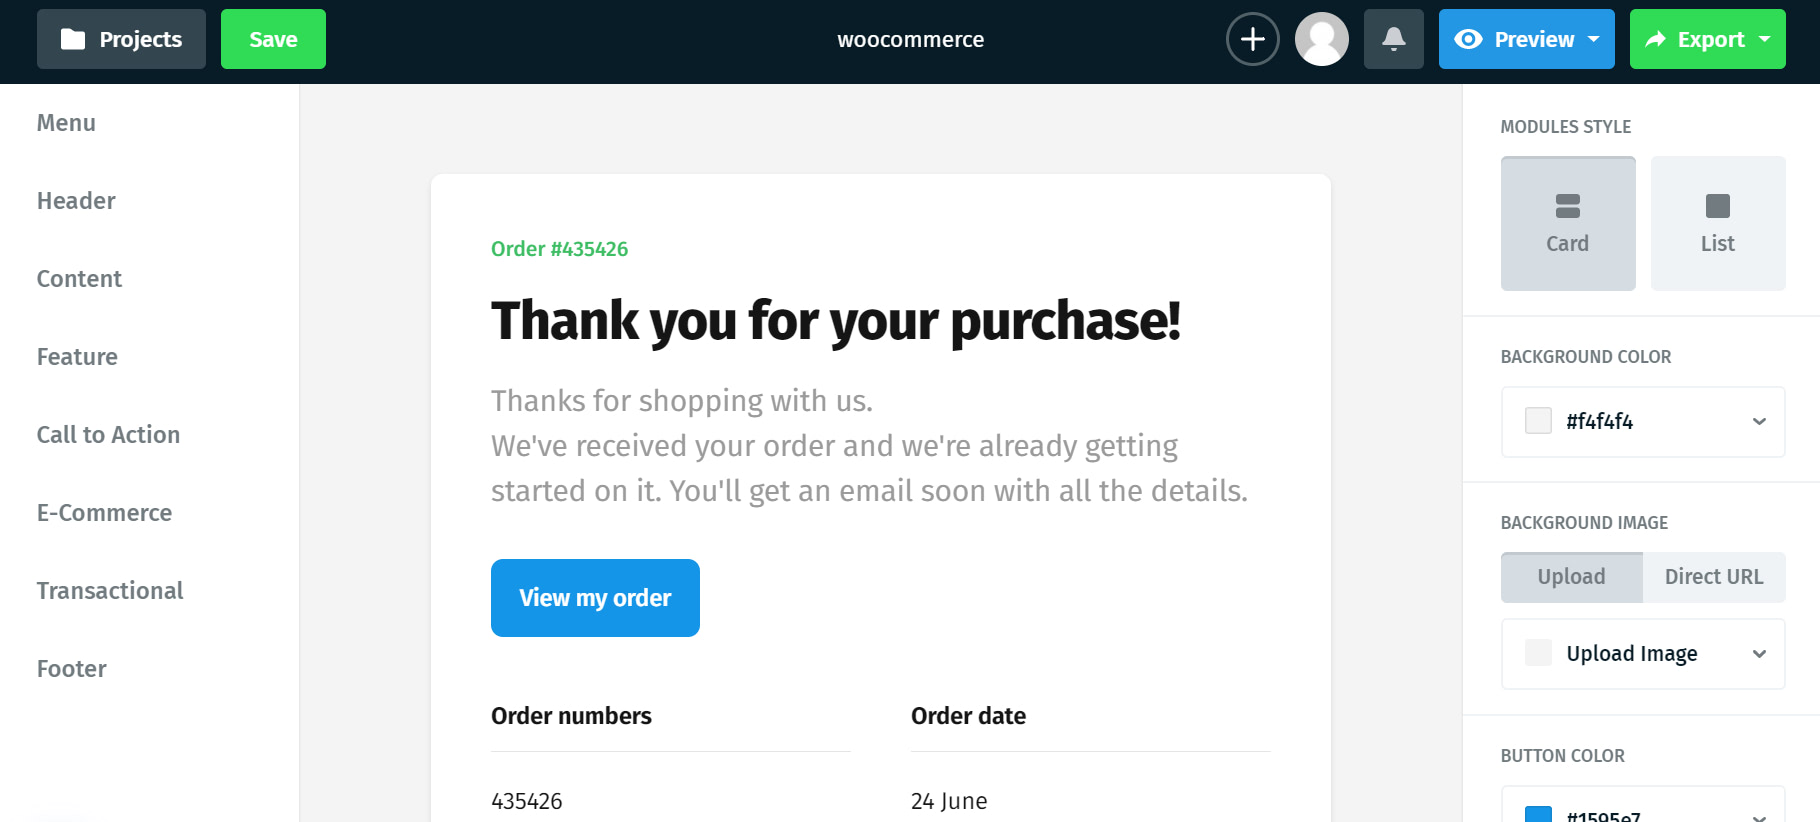 How To Customize WooCommerce Email Templates Using A Postcards Email Template Designmodo Help